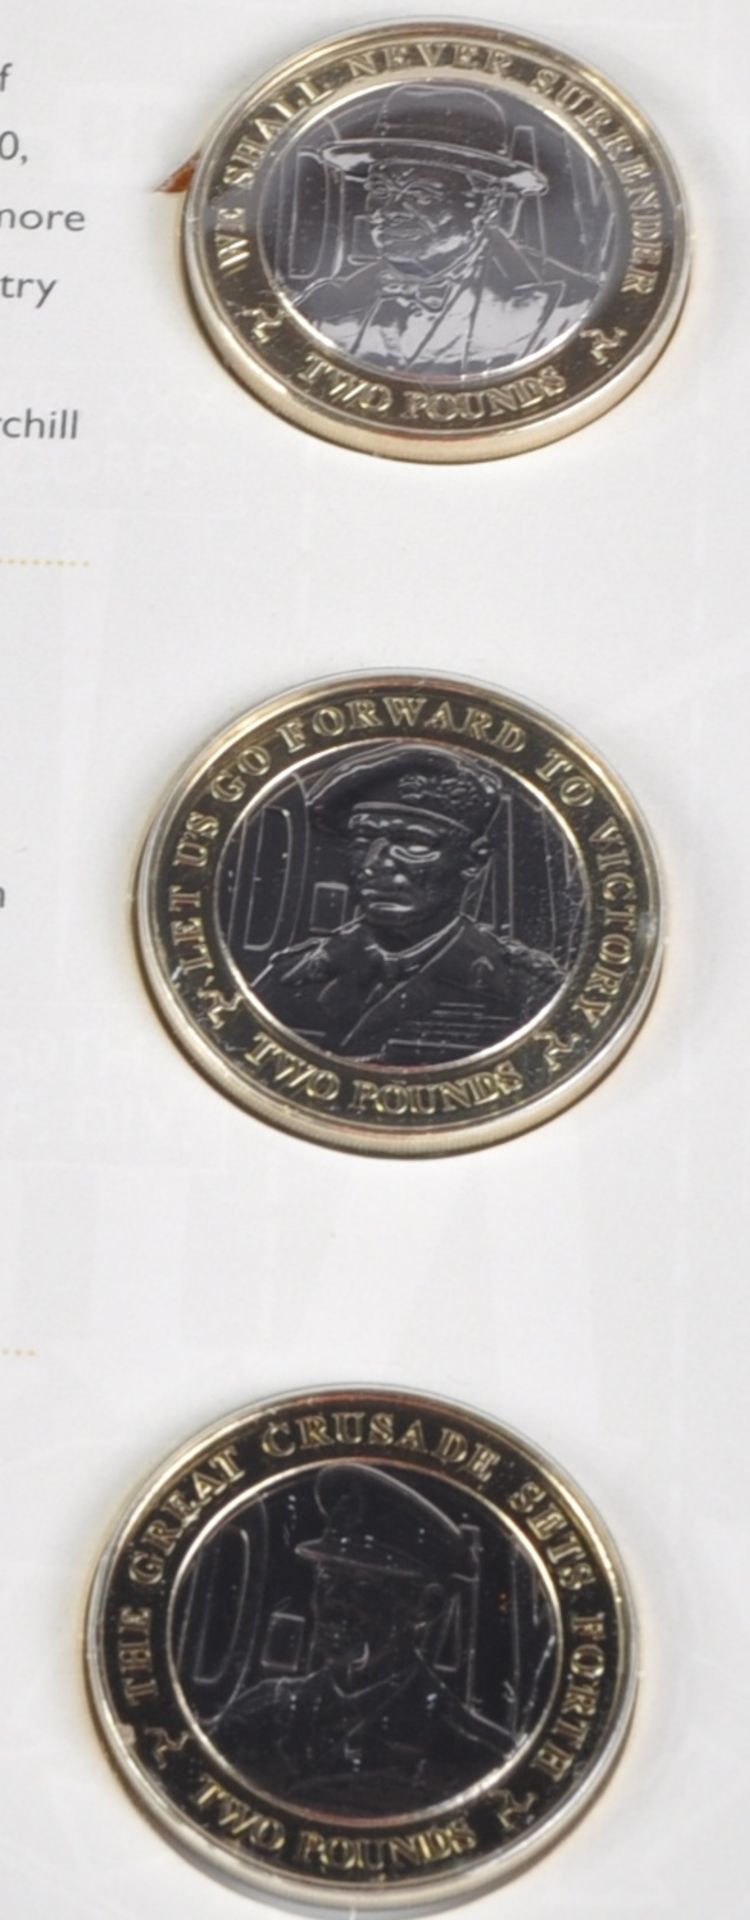 COINS - WWII SECOND WORLD WAR RELATED COIN SETS - Image 2 of 3